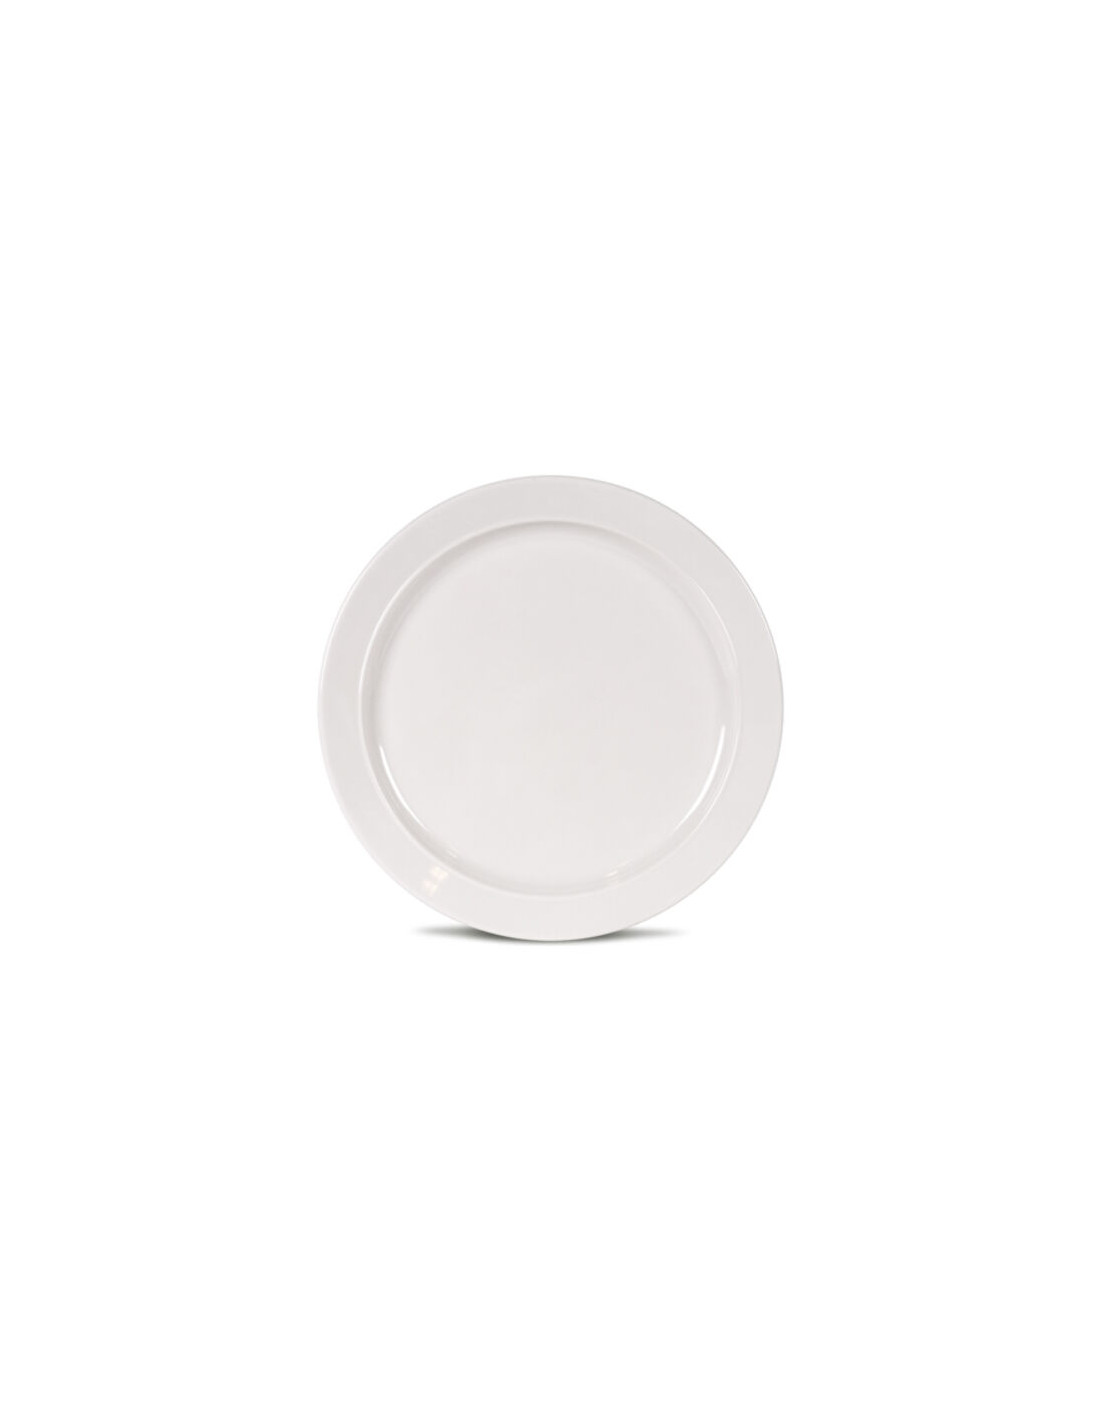 CLASSIC WHITE SIDE PLATE